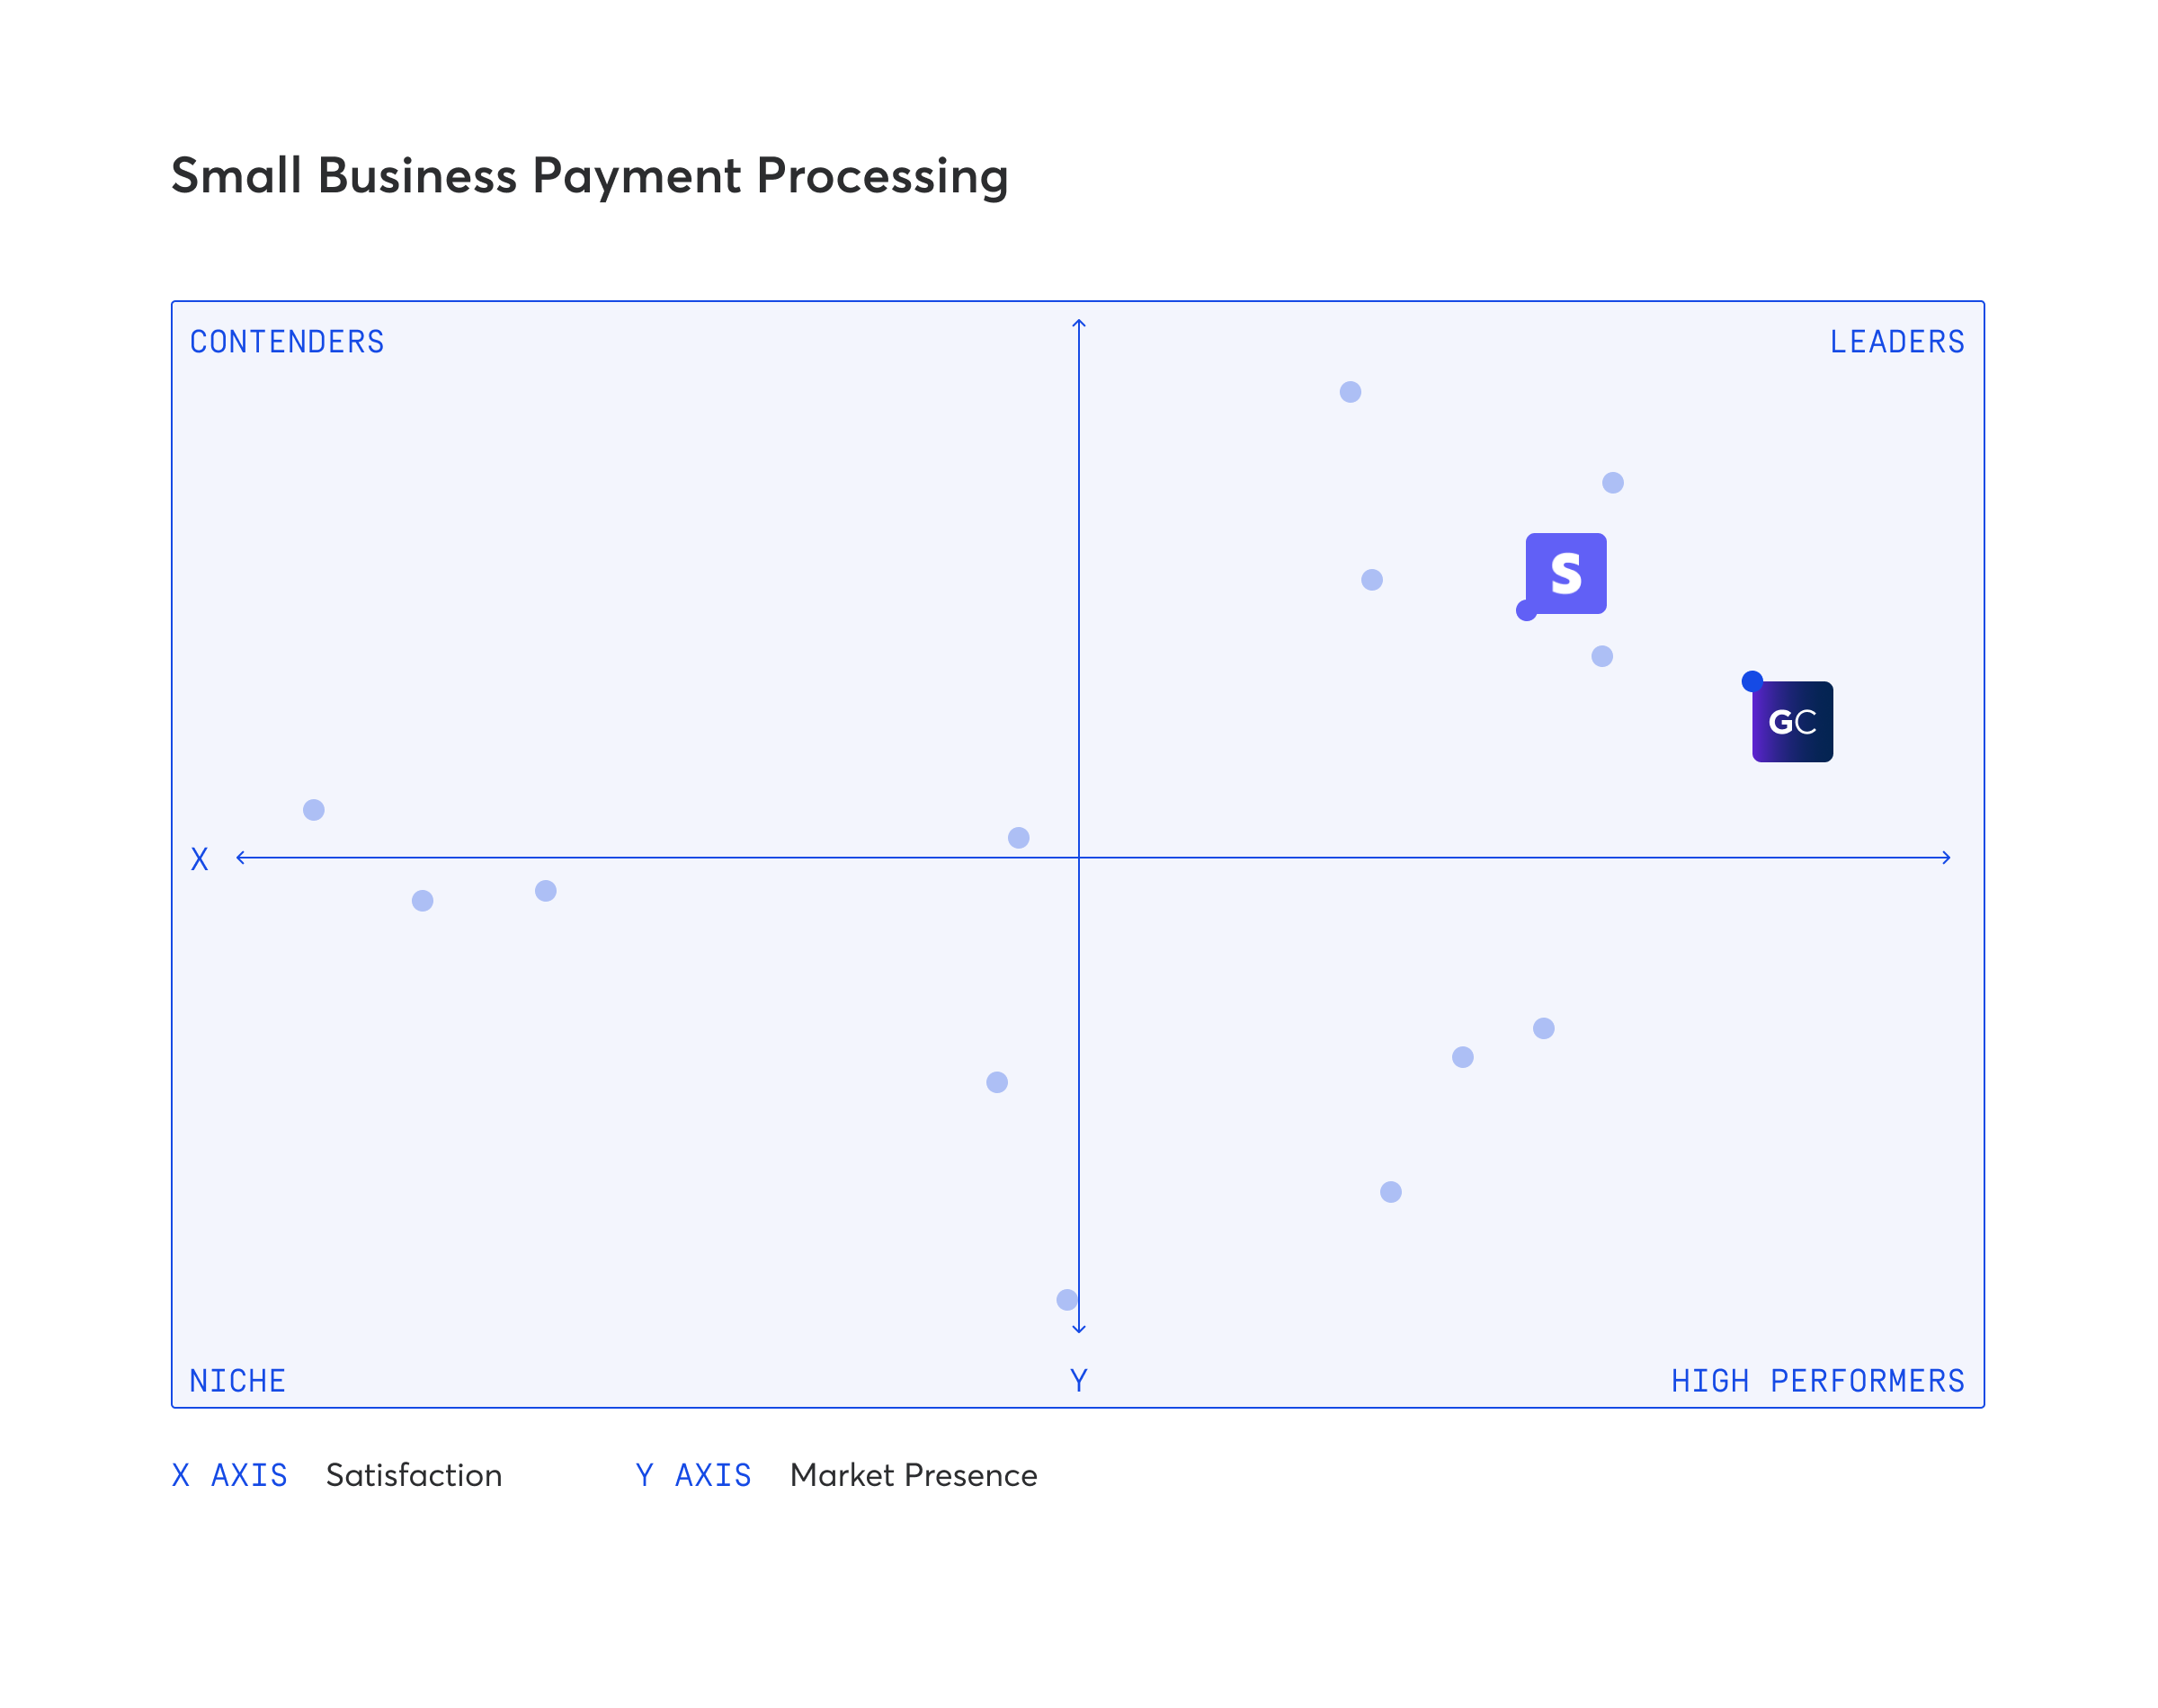 Small-Business-Payment-Processing-Grid